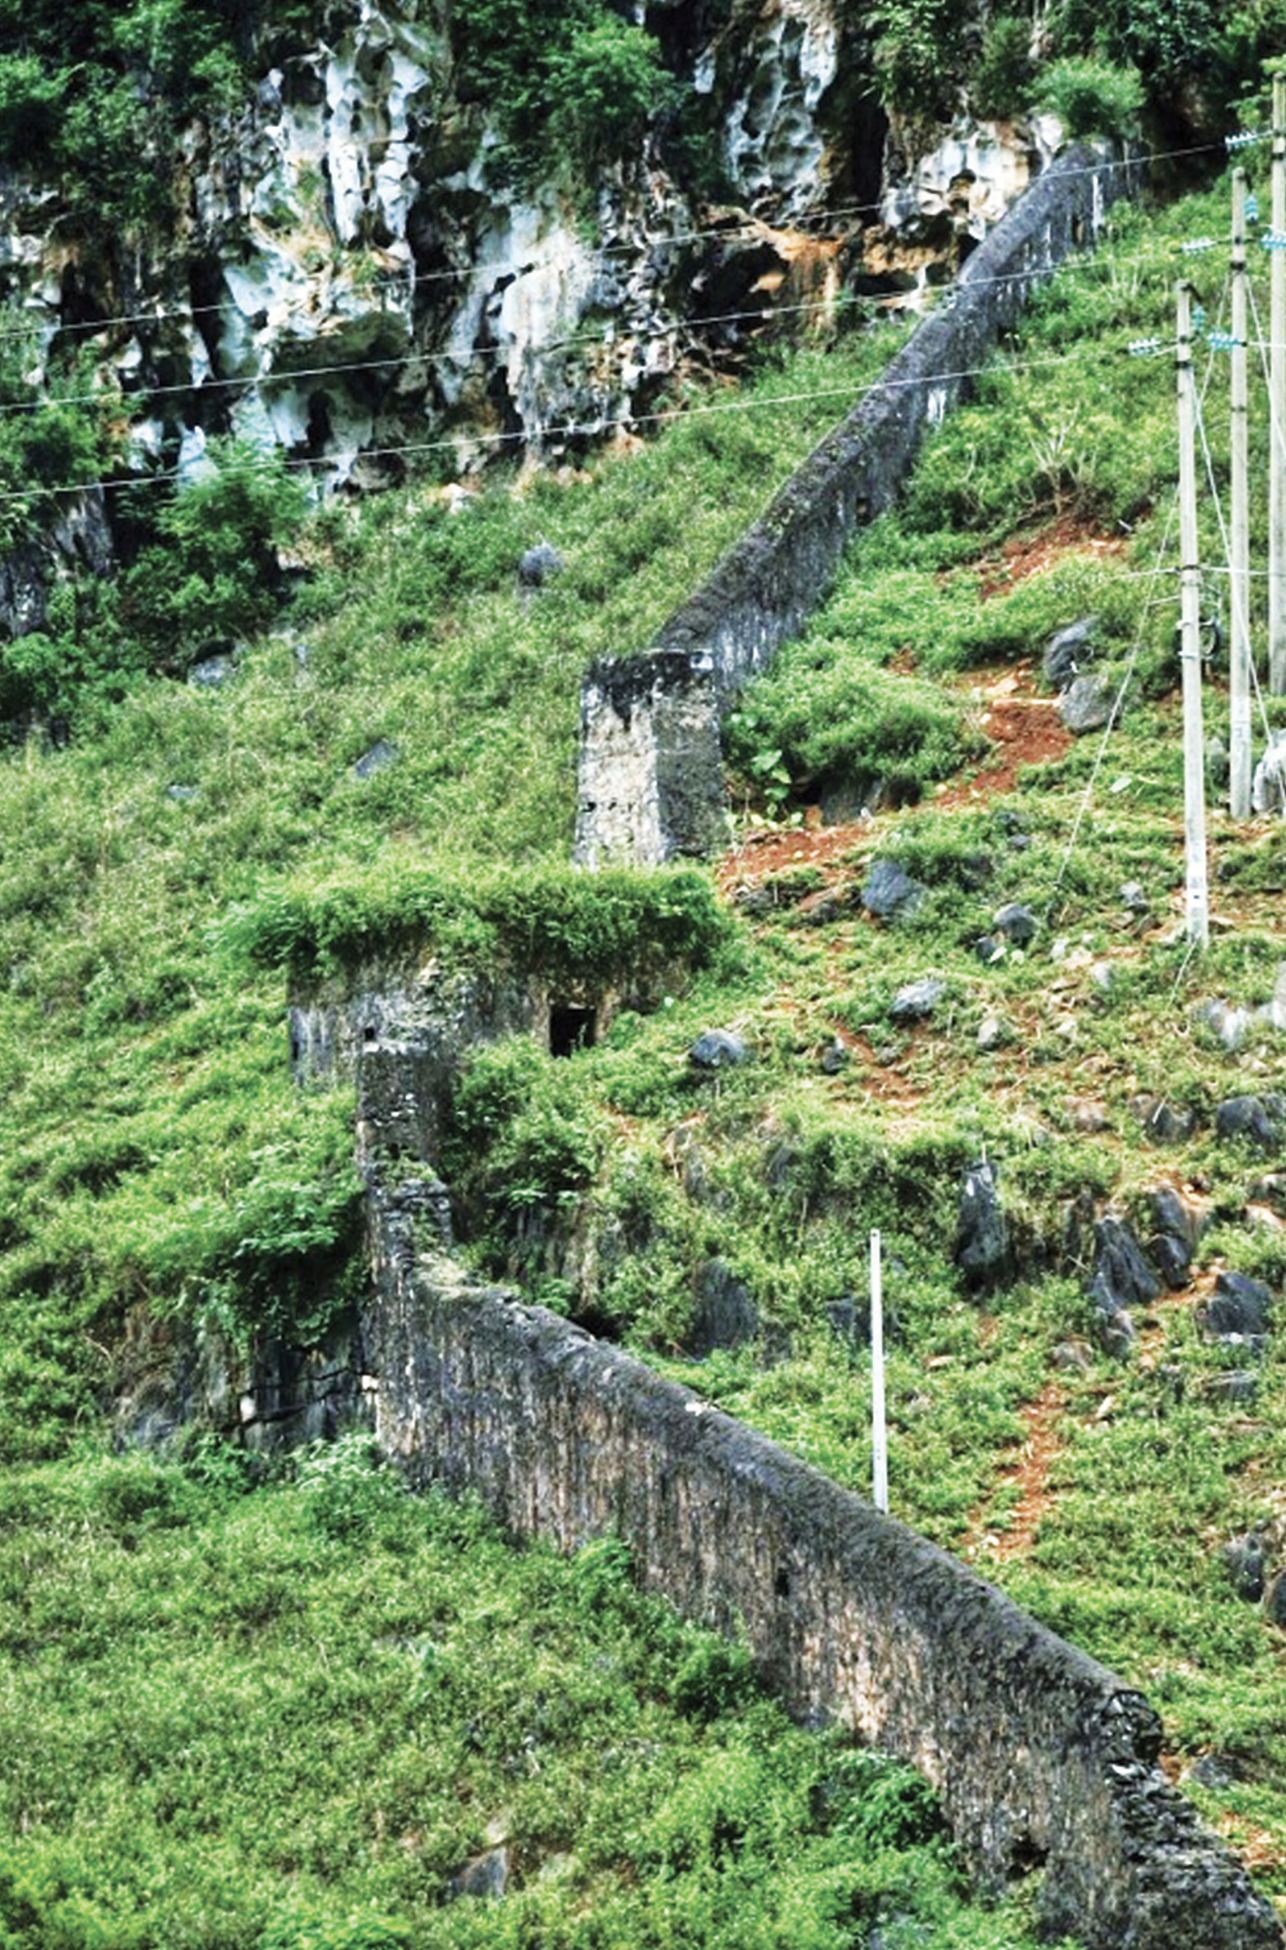 Can Ty Citadel, built by the French from 1935 to 1940, lies near National Highway 4C in Can Ty Commune under Quan Ba District, Ha Giang Province. Photo: Thanh Nguyen